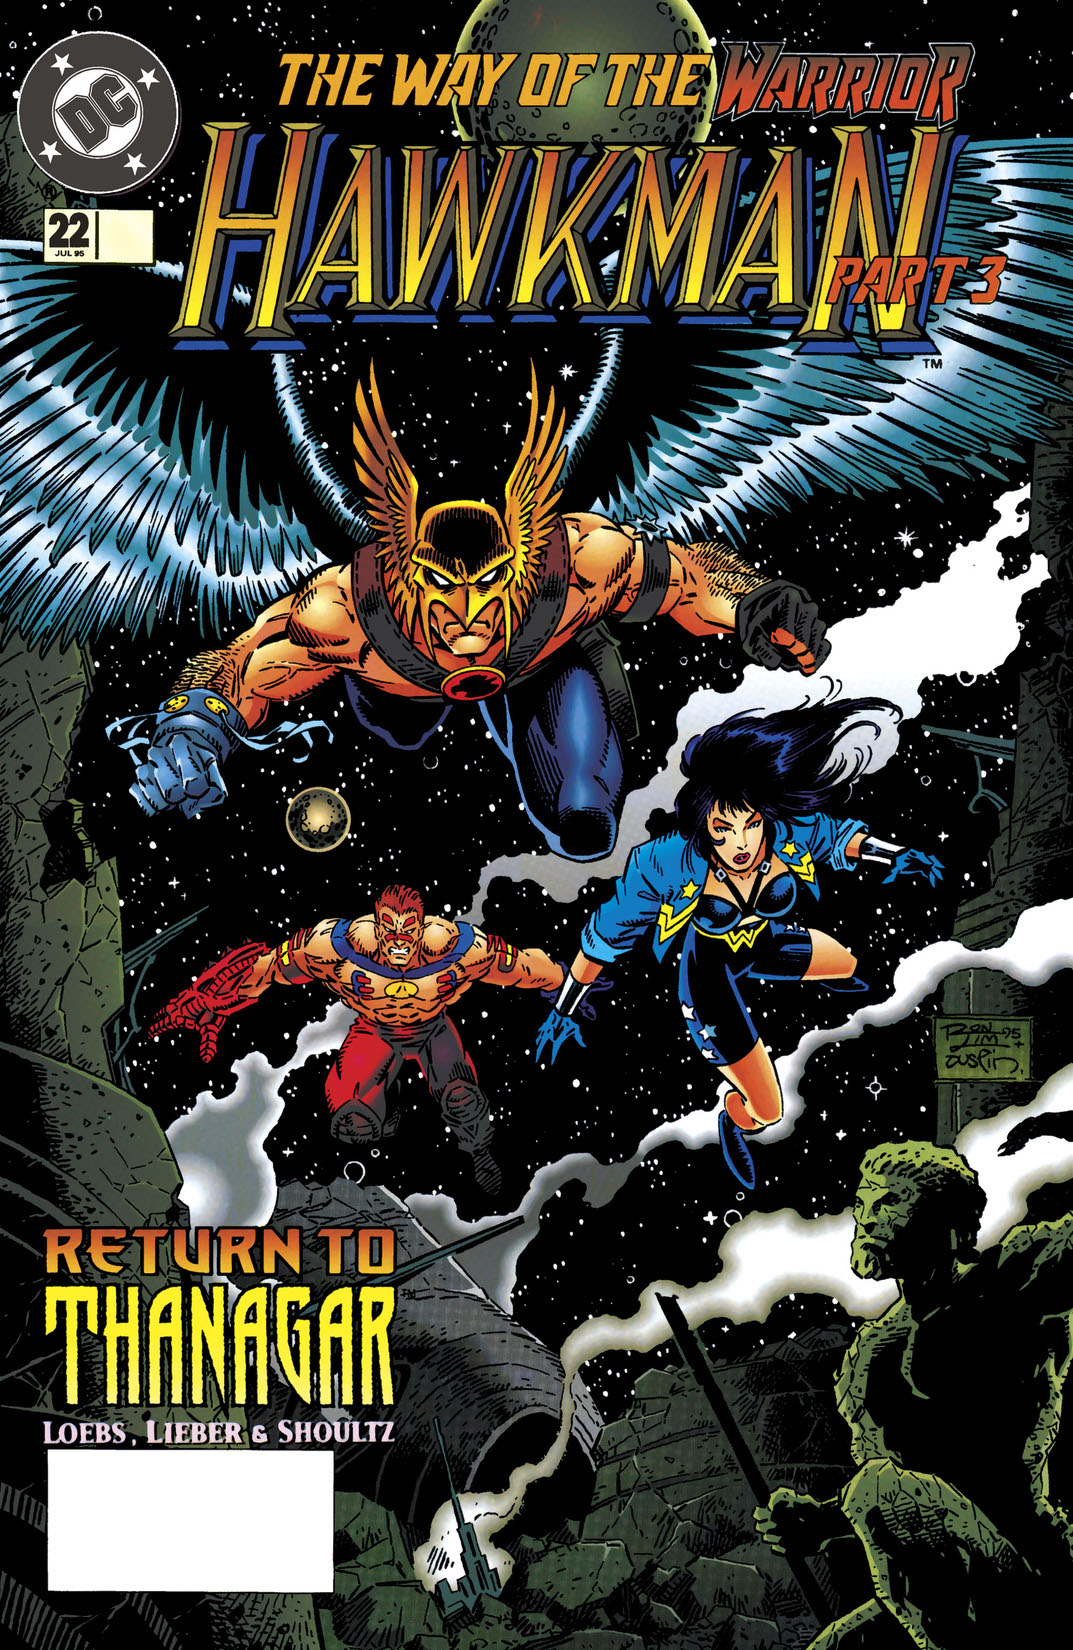 Hawkman (1993-) #22 preview images